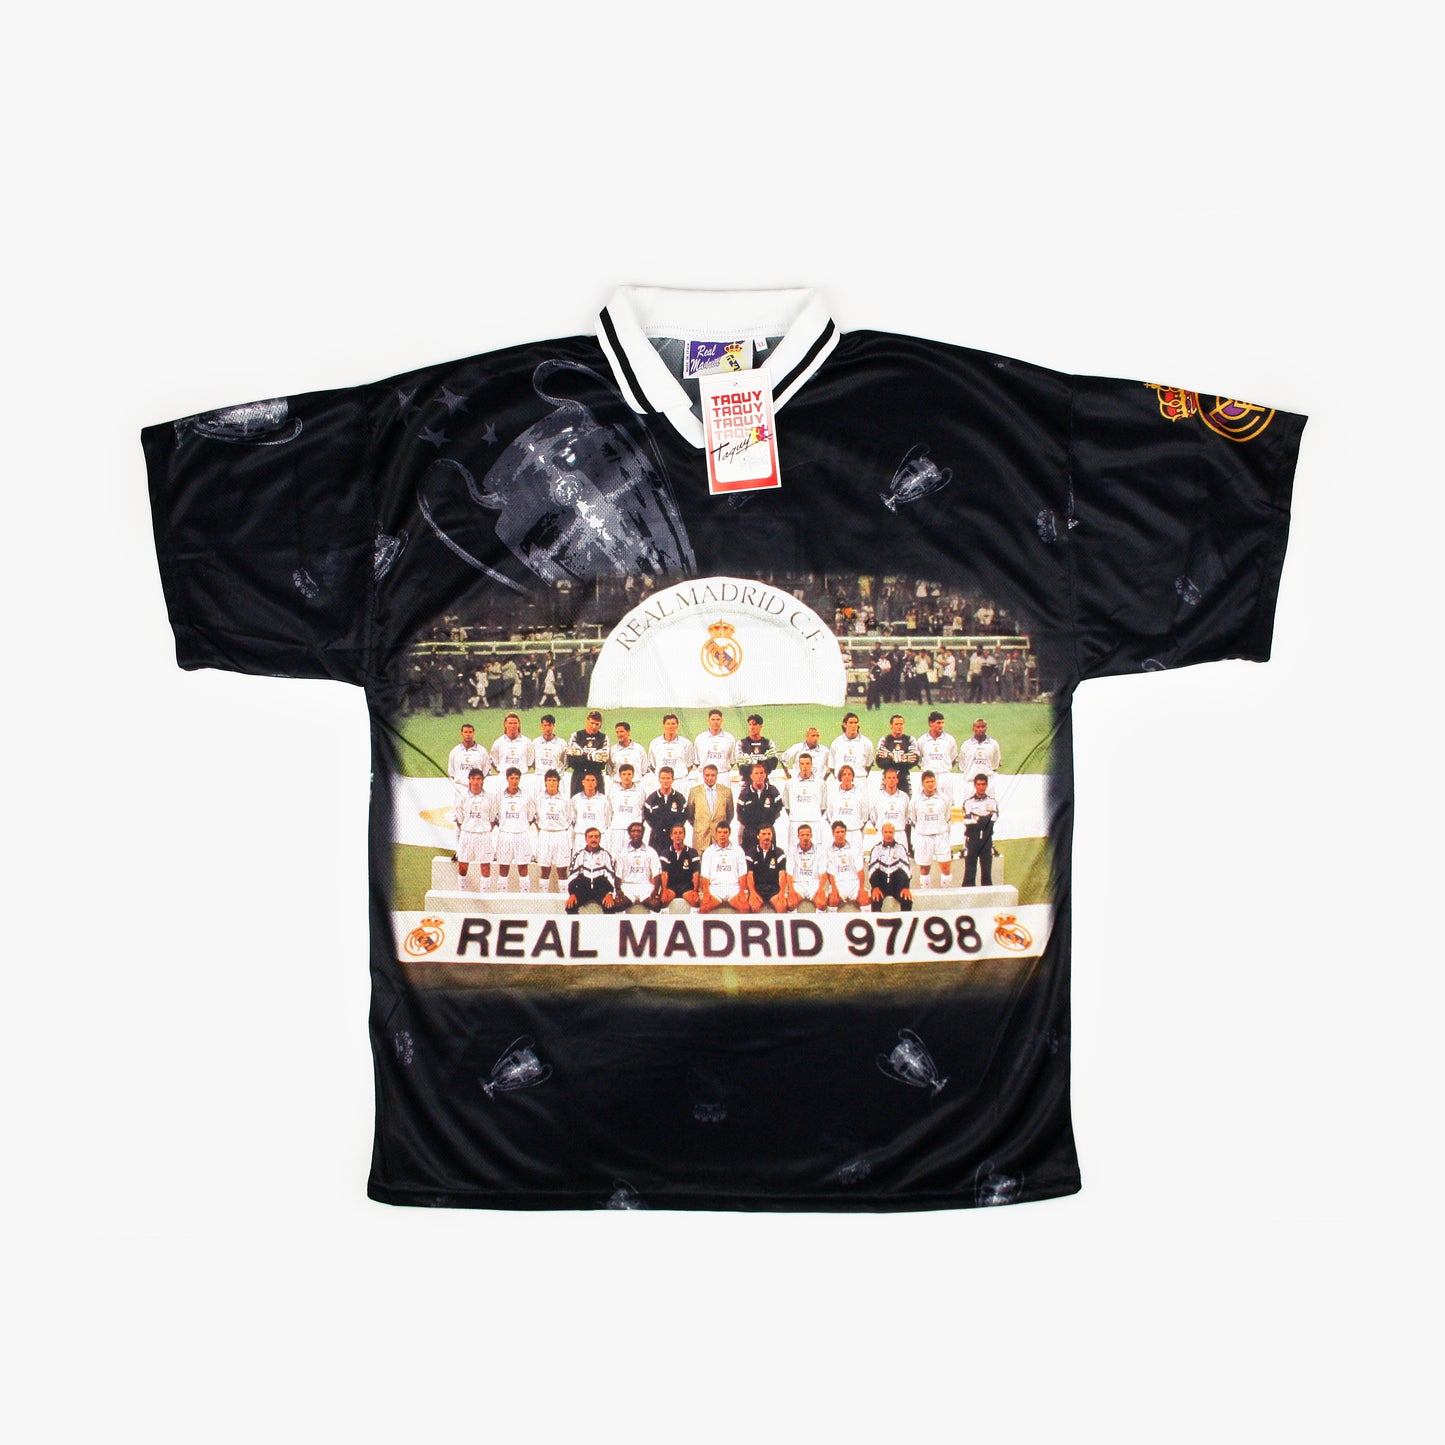 Real Madrid 97/98 • 'Copa de Europa' Official Merchandise **With Tags** • XL